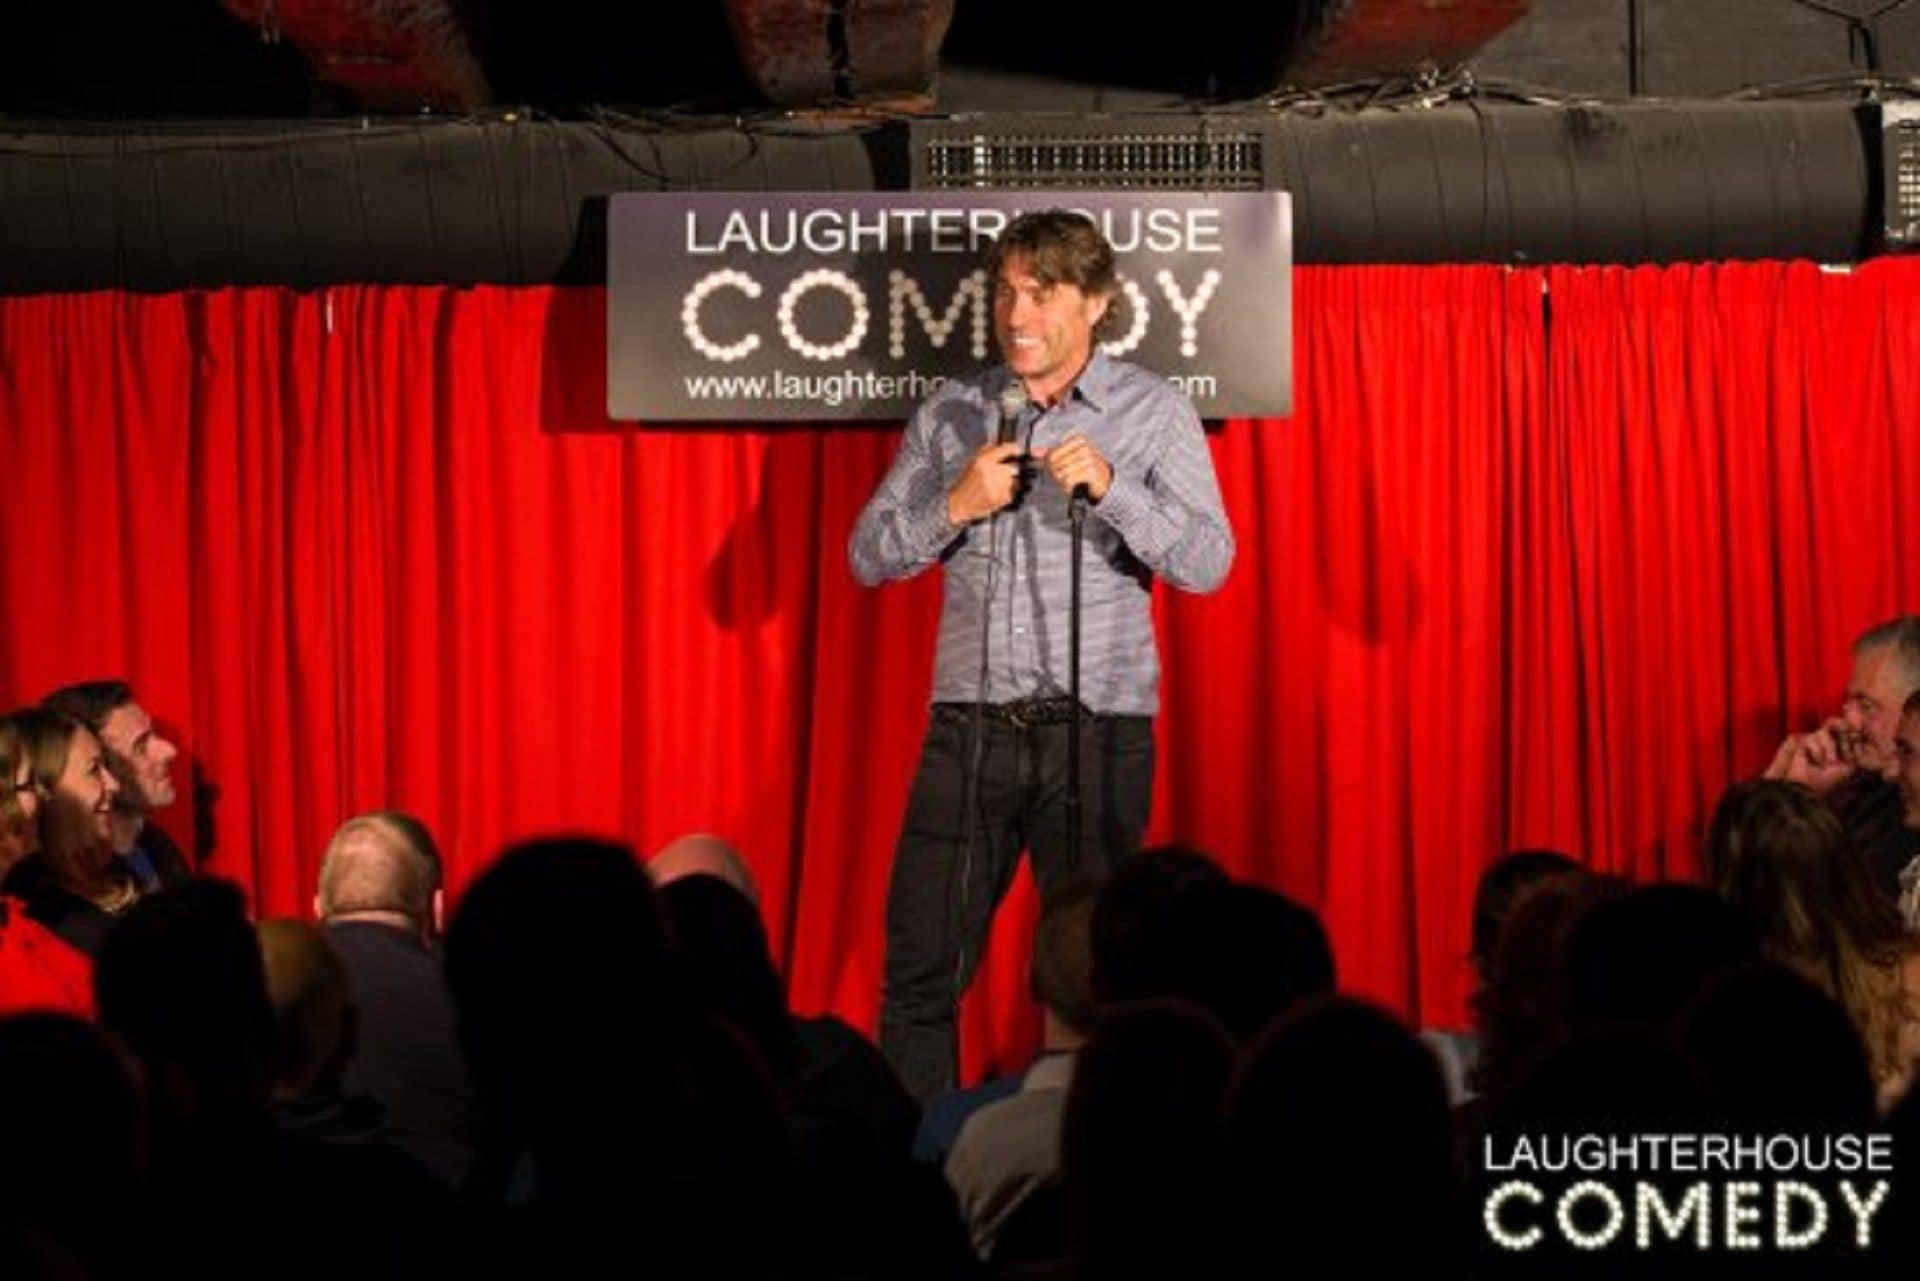 Laughterhouse Comedy in UK